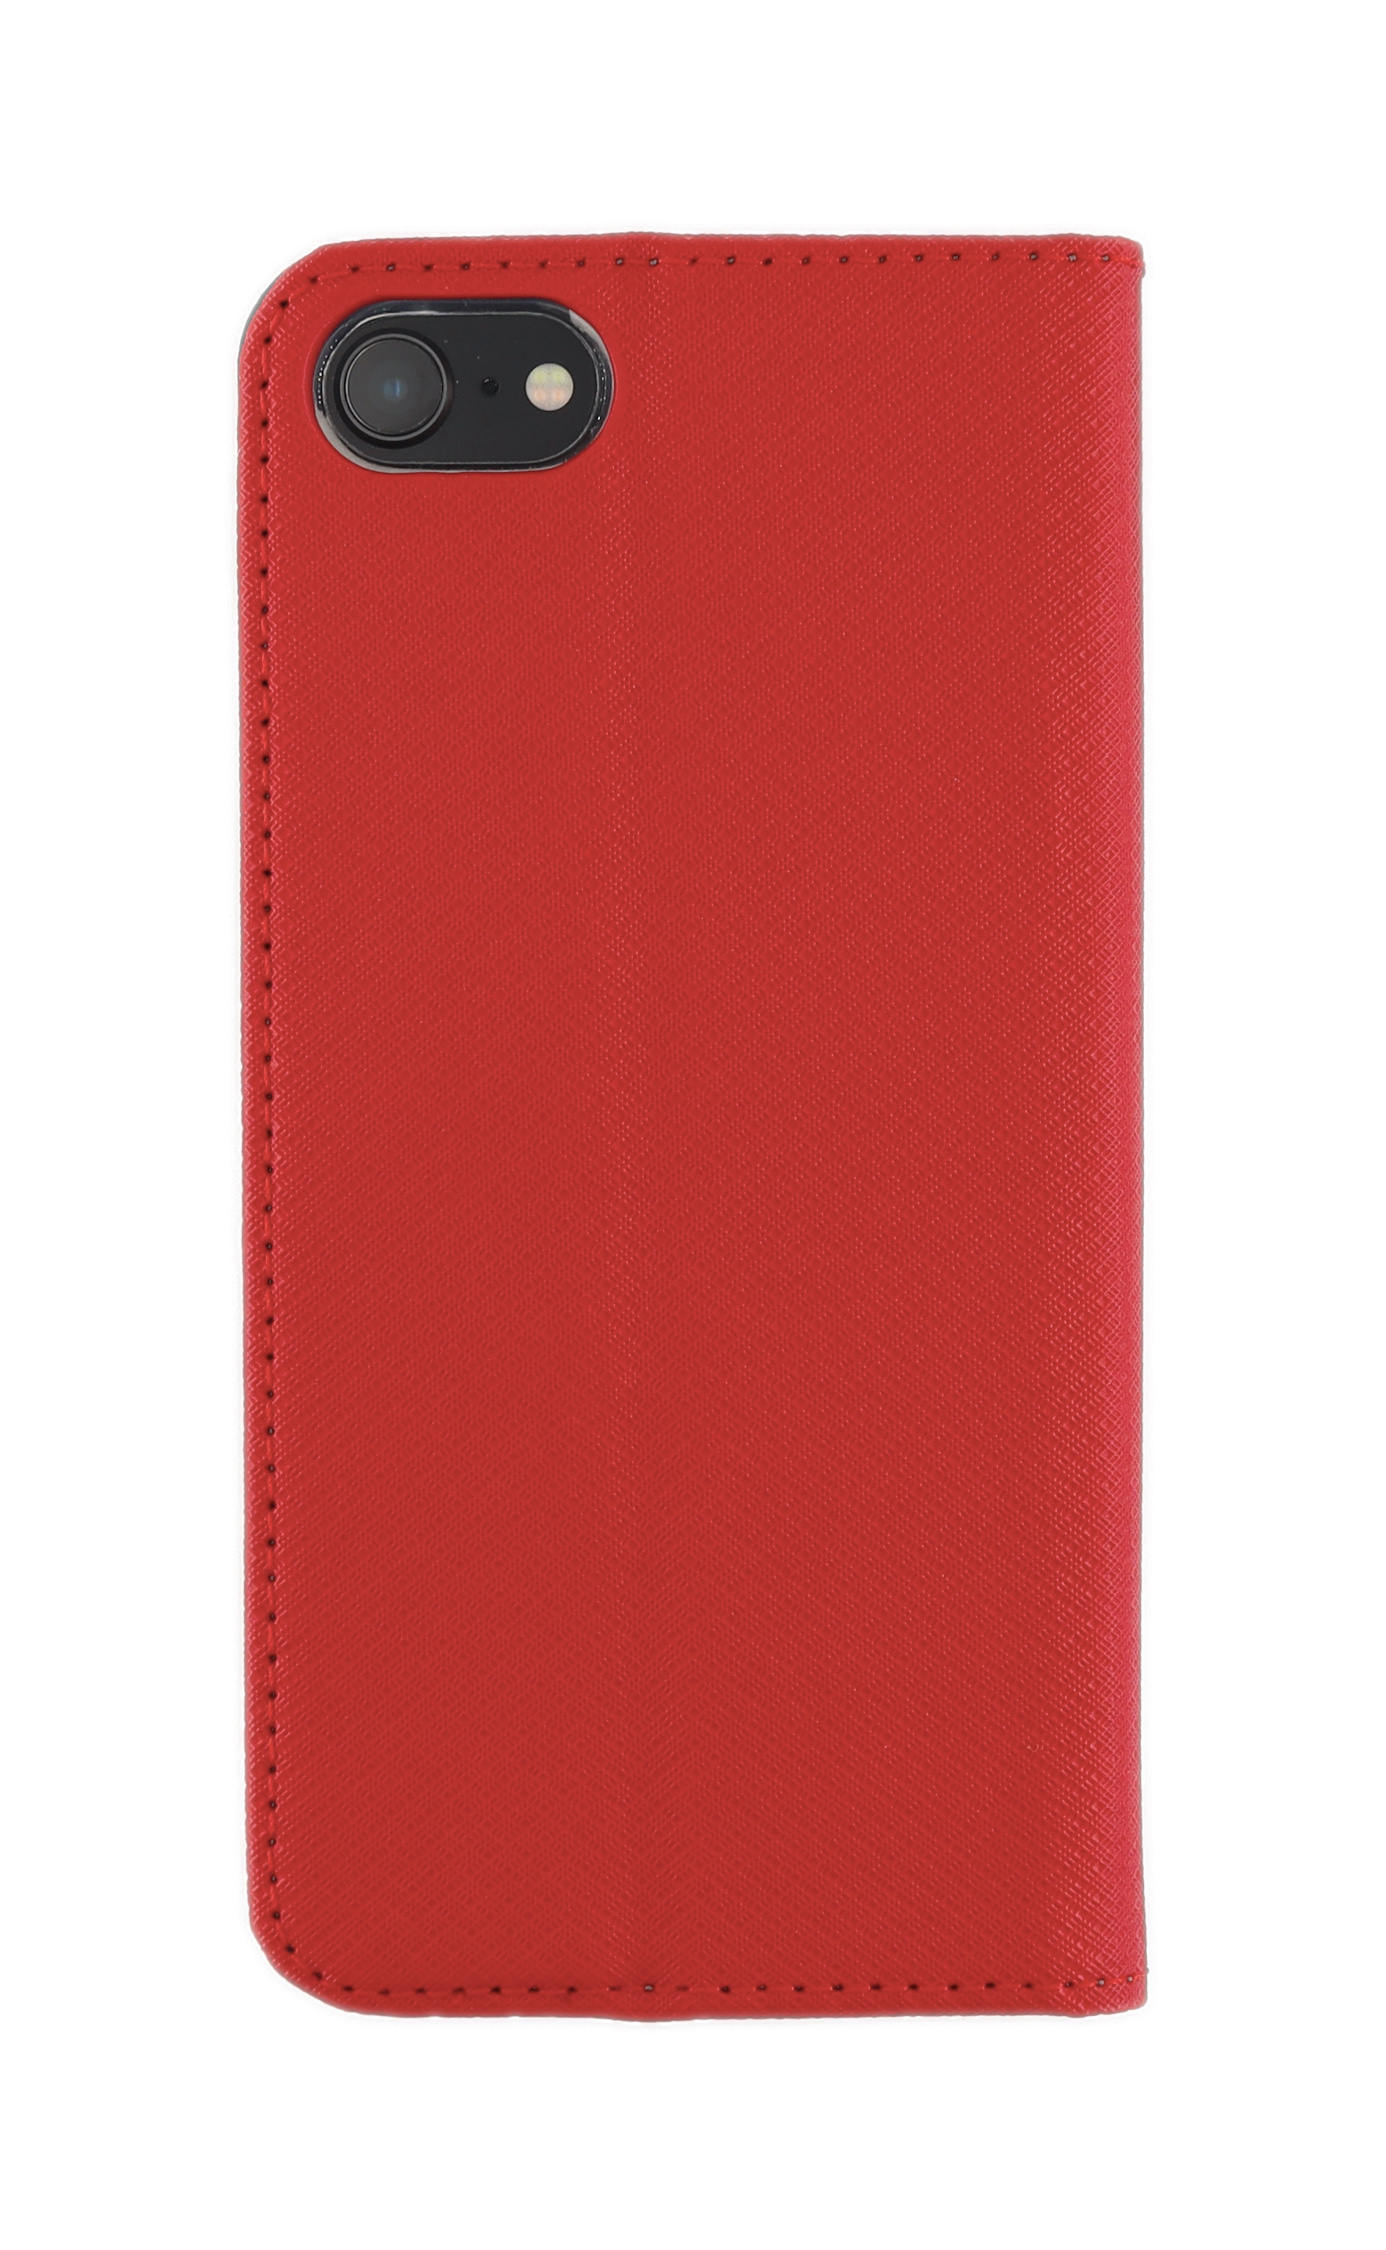 SE Apple, (2. Texture, iPhone 2020, iPhone SE 7, iPhone (3. Gen.), SE Rot Bookcase 2022, SE Gen.), Bookcover, iPhone JAMCOVER 8, iPhone iPhone